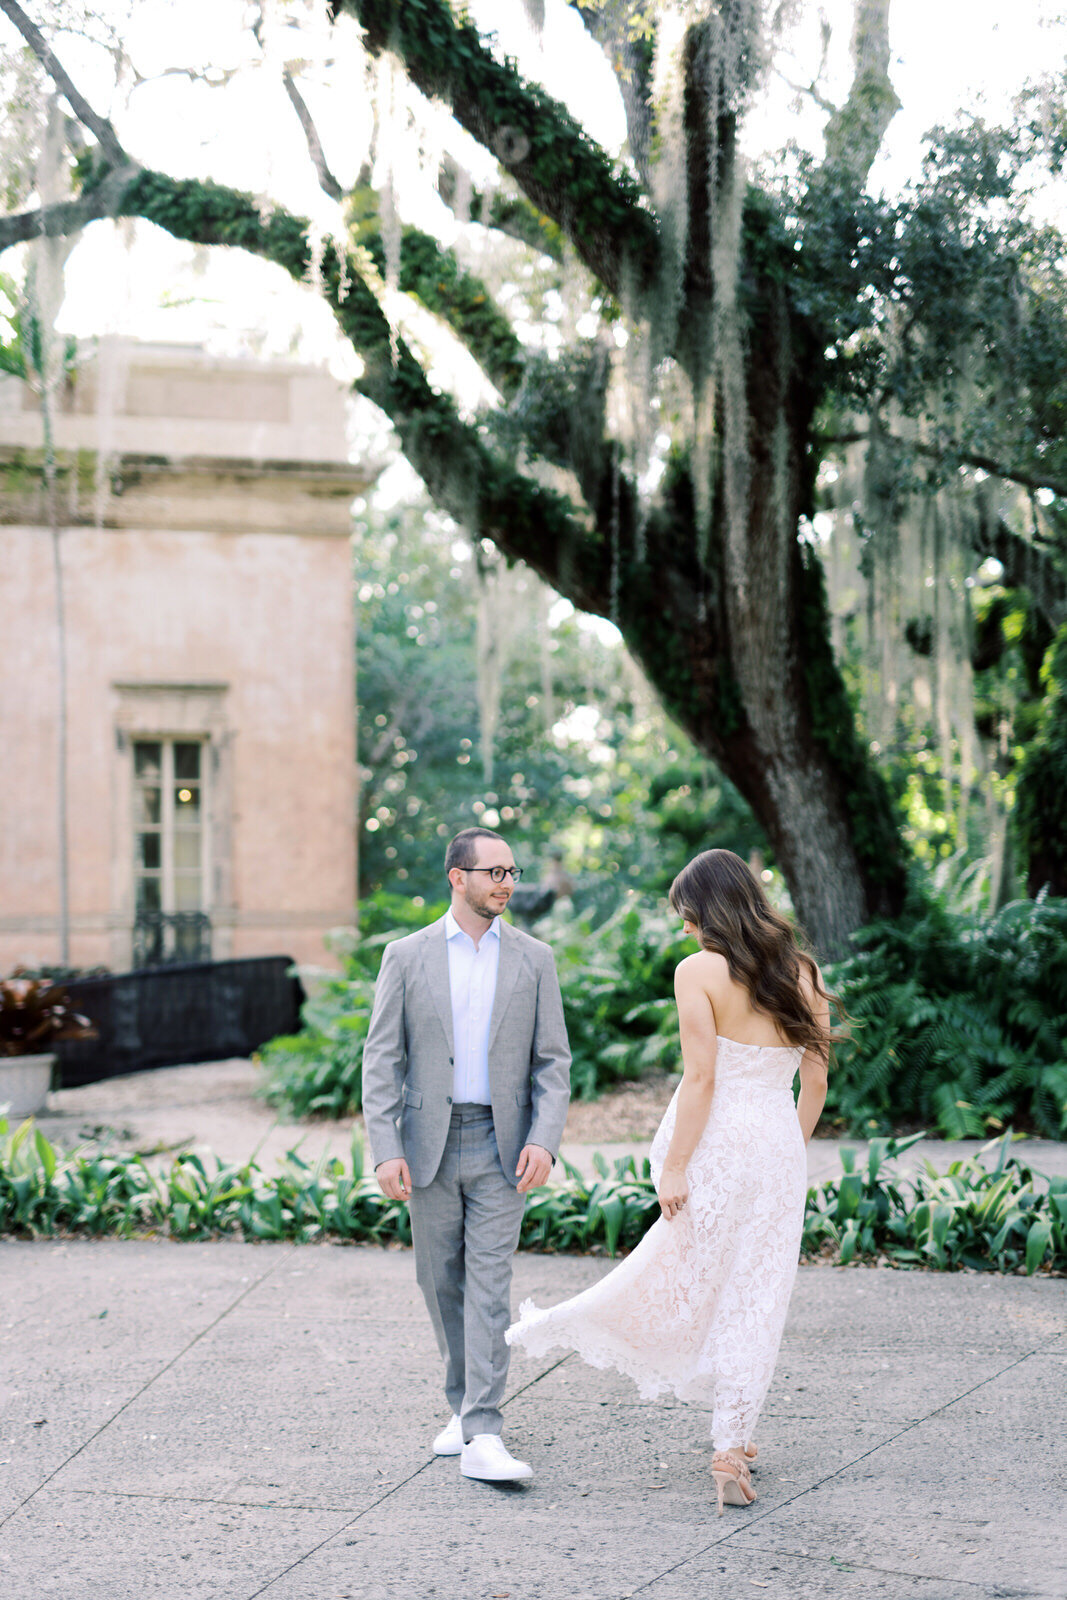 A Stylish and Chic Engagement Session at Vizcaya Museum in Miami Florida 20